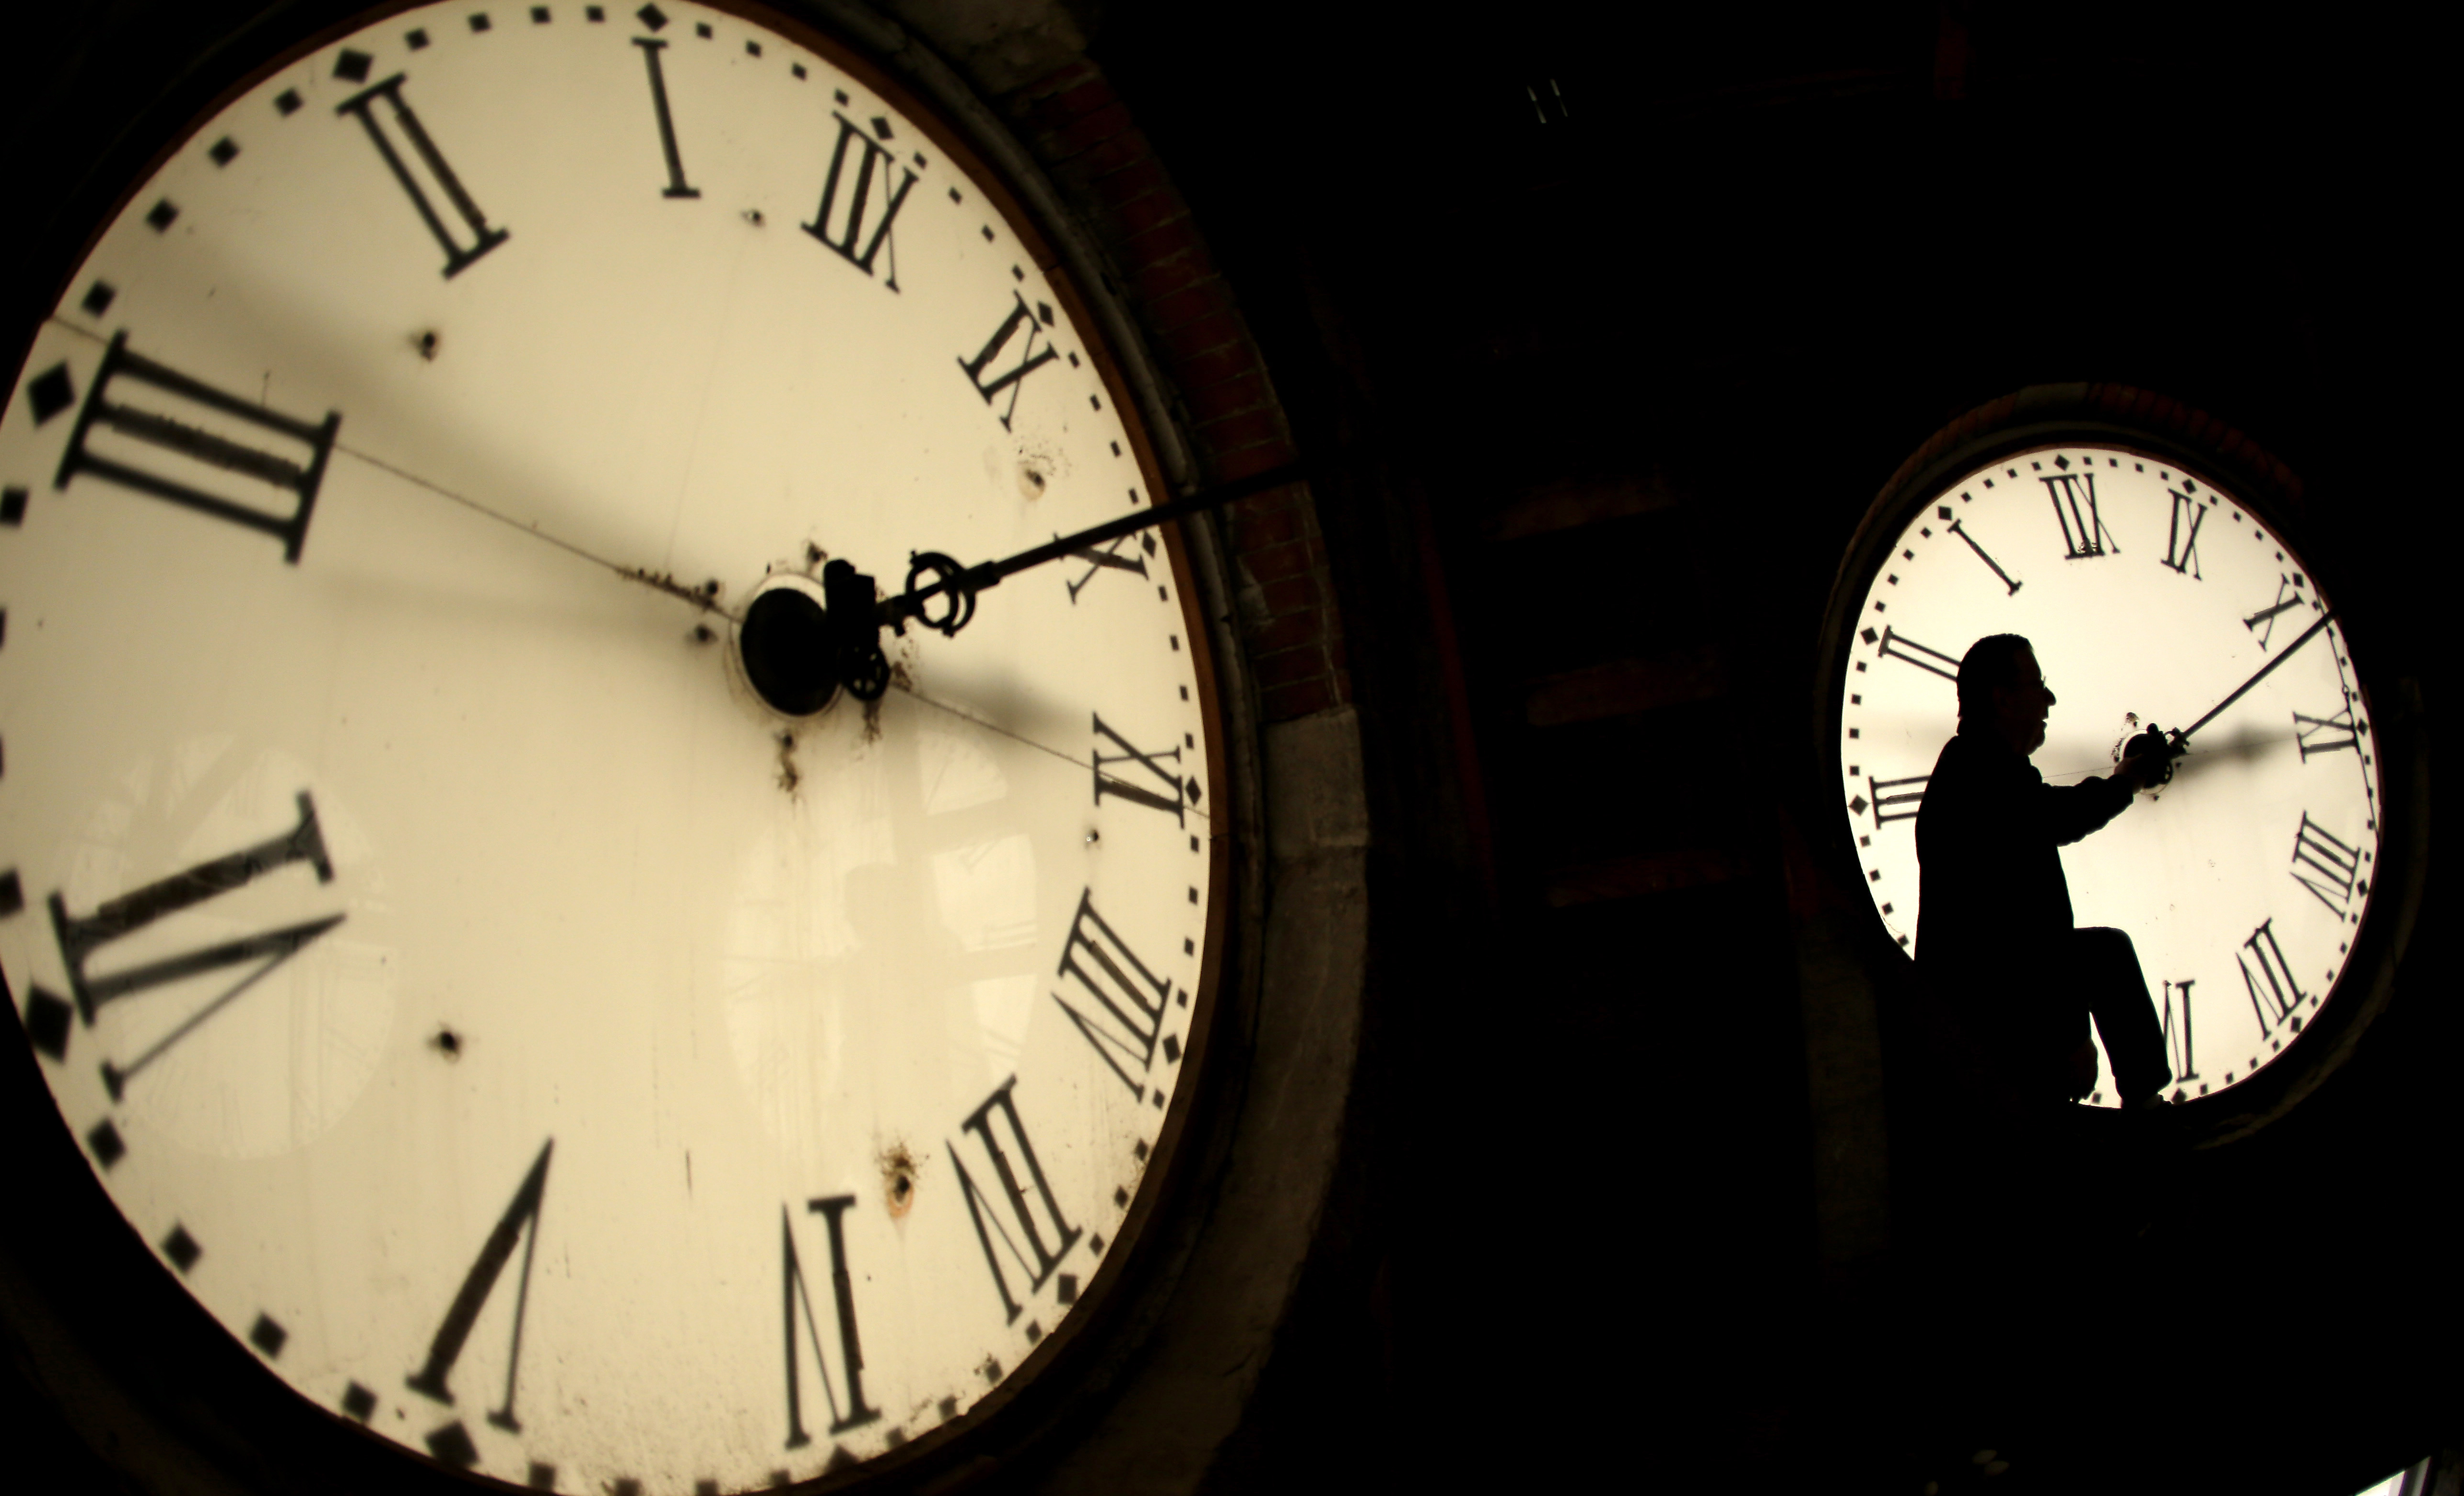 Changing our clocks is a health hazard. Just ask a sleep doctor - OPB